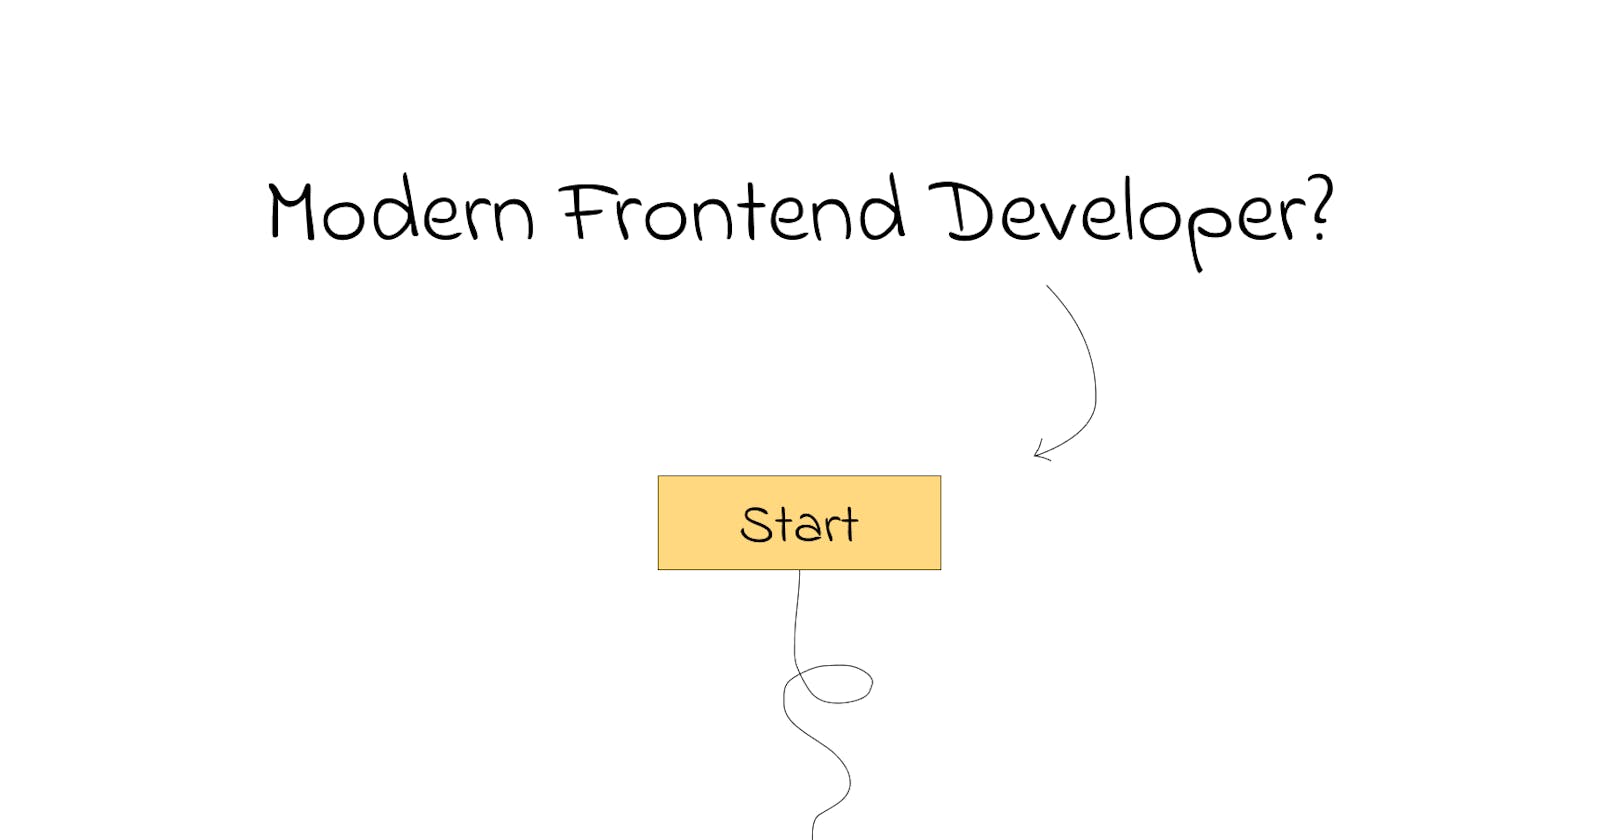 Step By Step Guide To Become Modern Frontend Developer In 2021